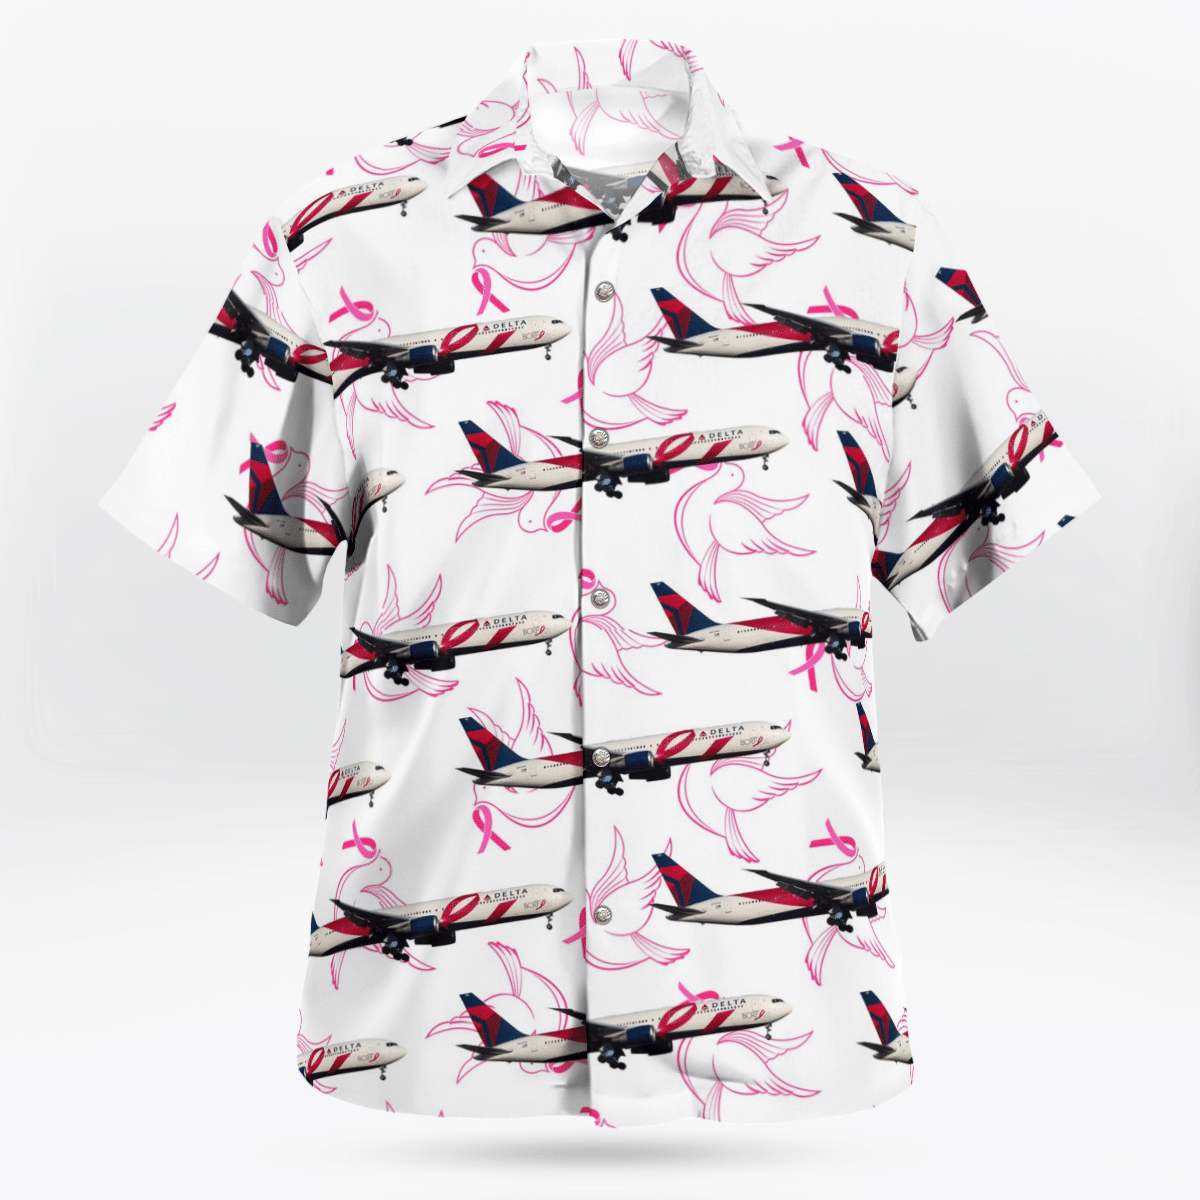 HOT Delta Air Lines Boeing 767-432 ER Breast Cancer Awareness Pink Ribbon Livery Hawaii Shirt 2